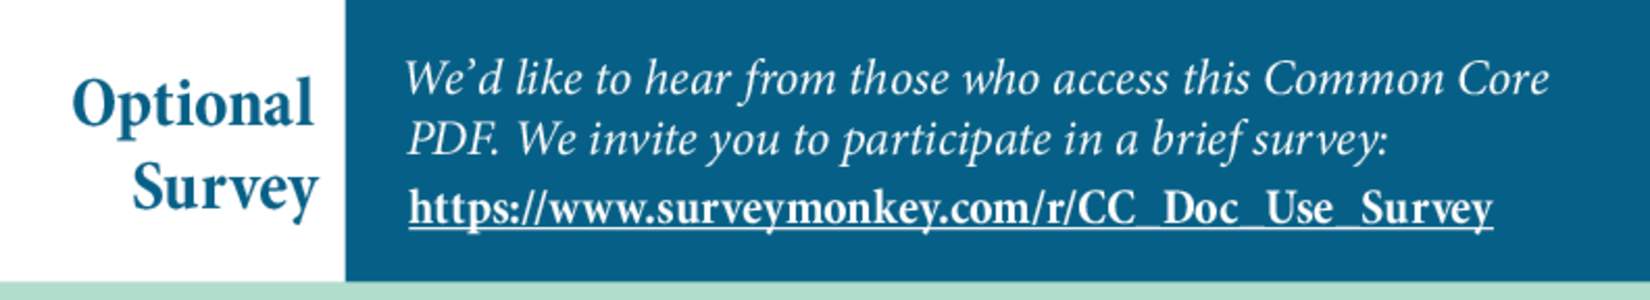 Optional Survey We’d like to hear from those who access this Common Core PDF. We invite you to participate in a brief survey: https://www.surveymonkey.com/r/CC_Doc_Use_Survey